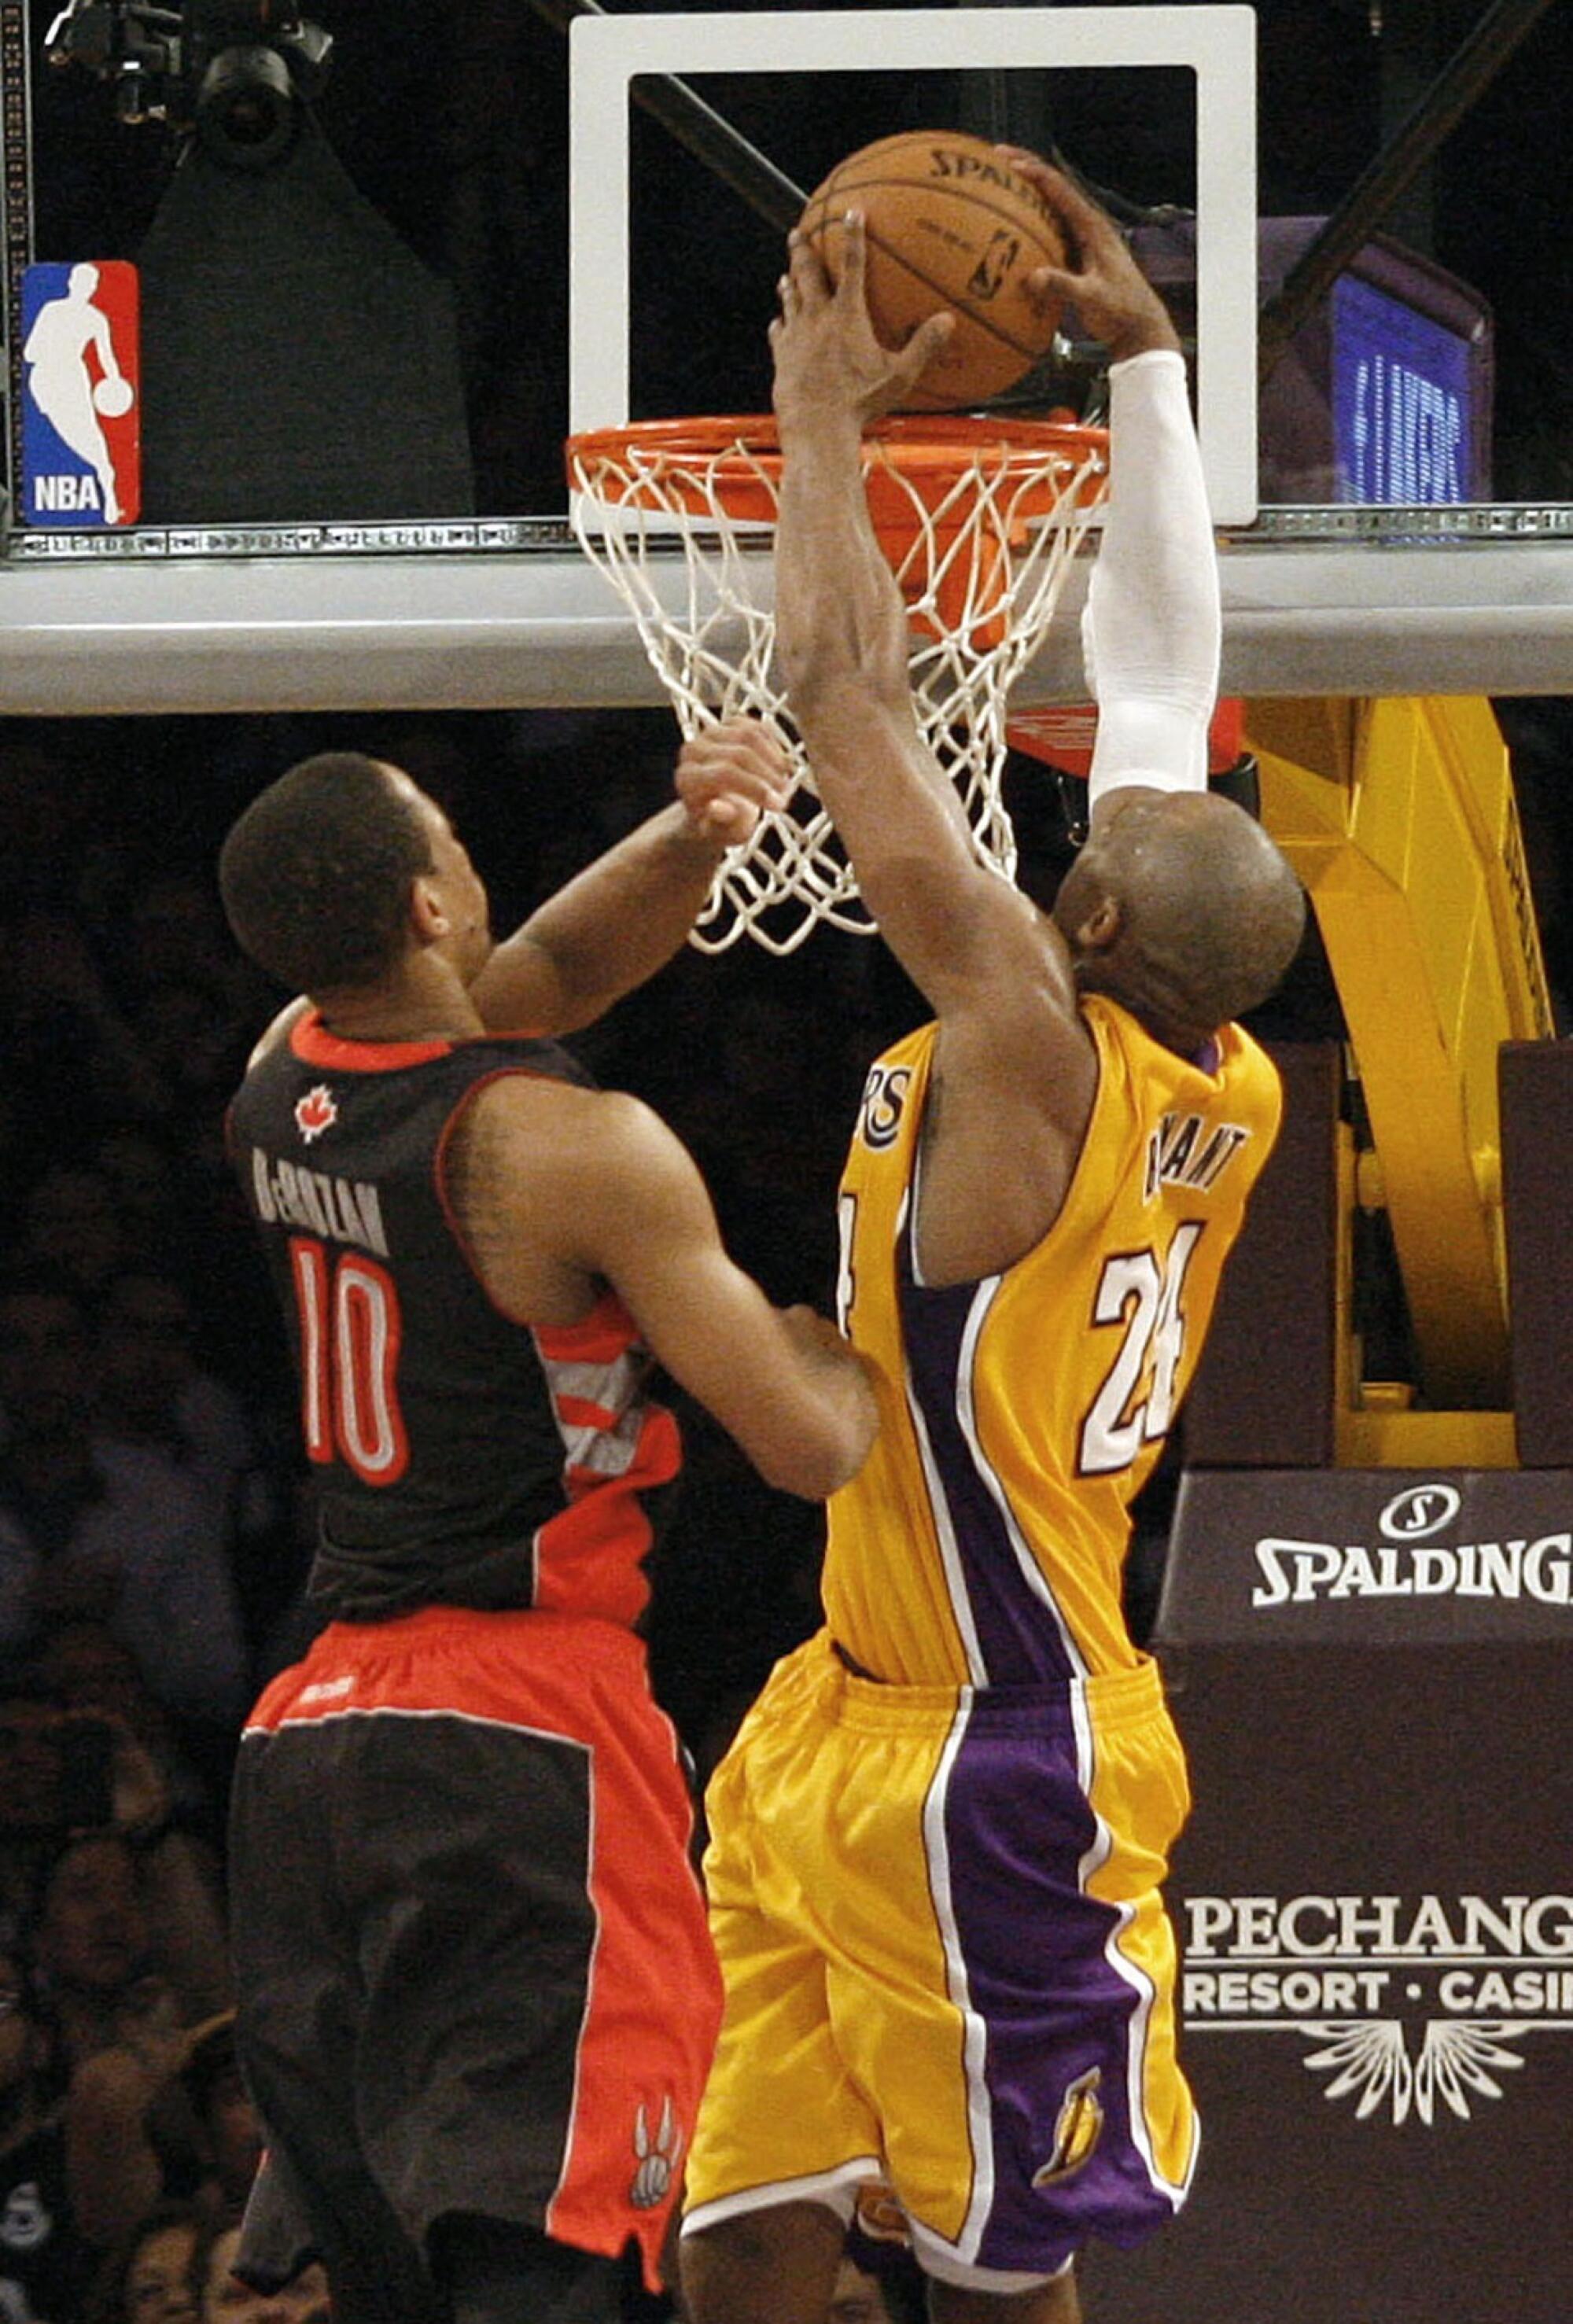 Lakers guard Kobe Bryant finishes goes up for a dunk against Raptors guard DeMar DeRozan.